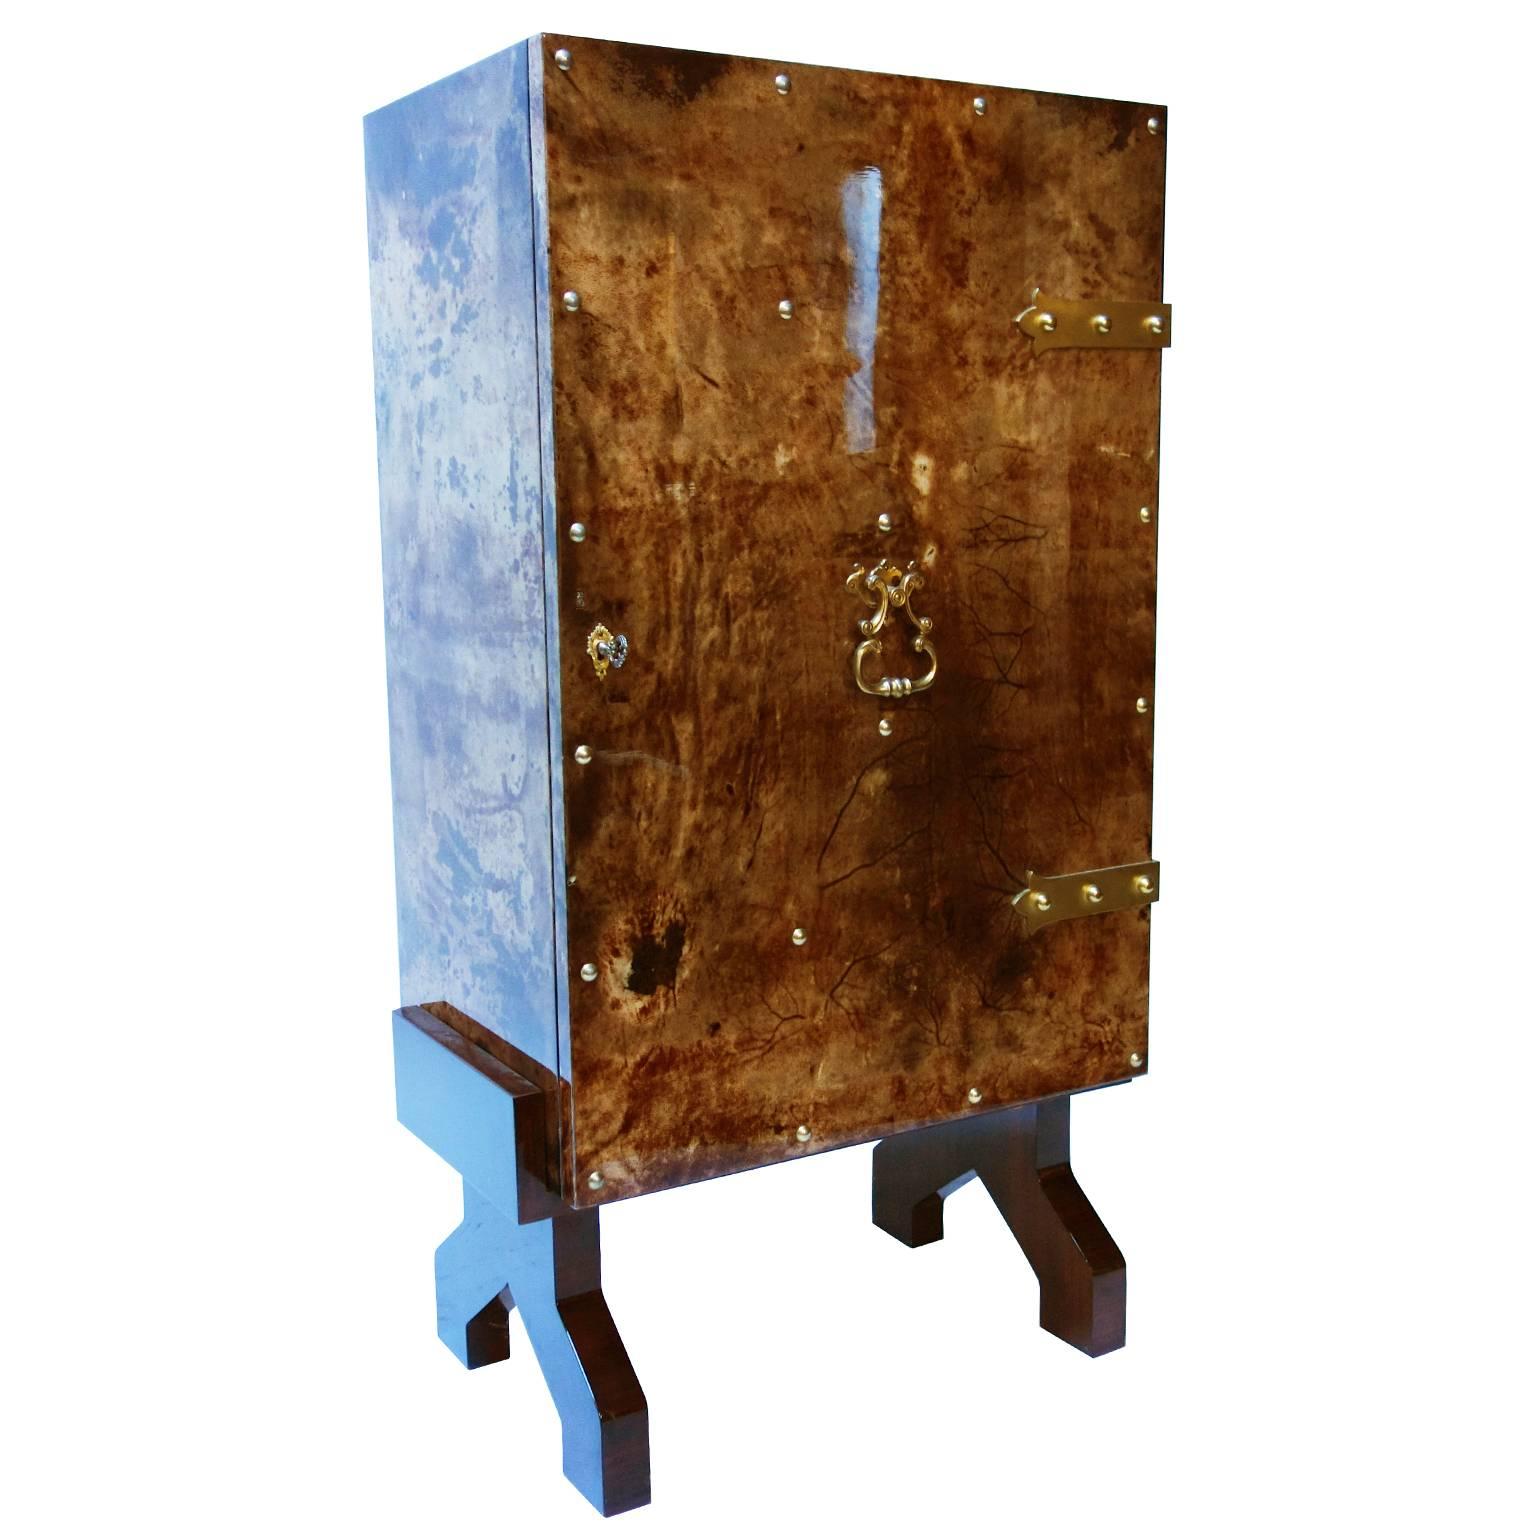 Italian drinks cabinet by Aldo Tura in tortoise lacquered goatskin with brass stud design hardware. The Mid-Century design is illuminated by a central down-lighter and features one-door with two shelved spaces, central shelved bar mirror lined